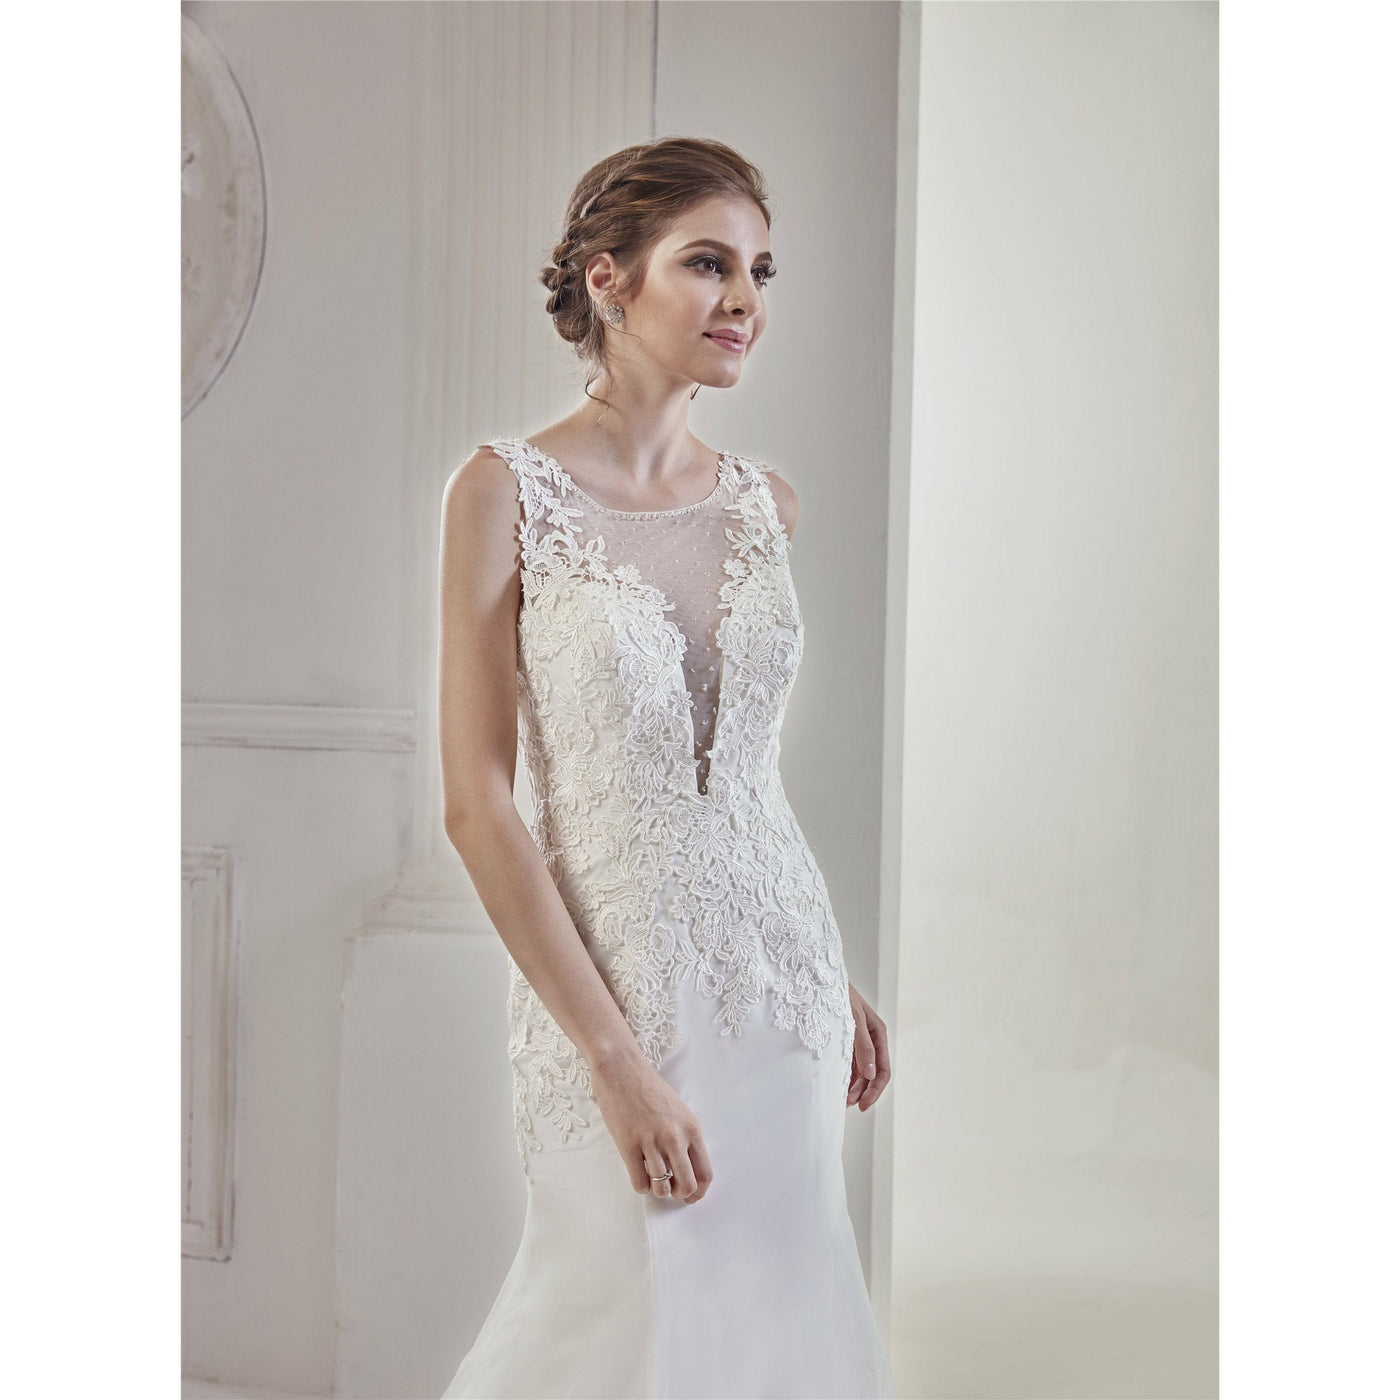 Chicely Plunging V Lace applique Mermaid wedding dress1